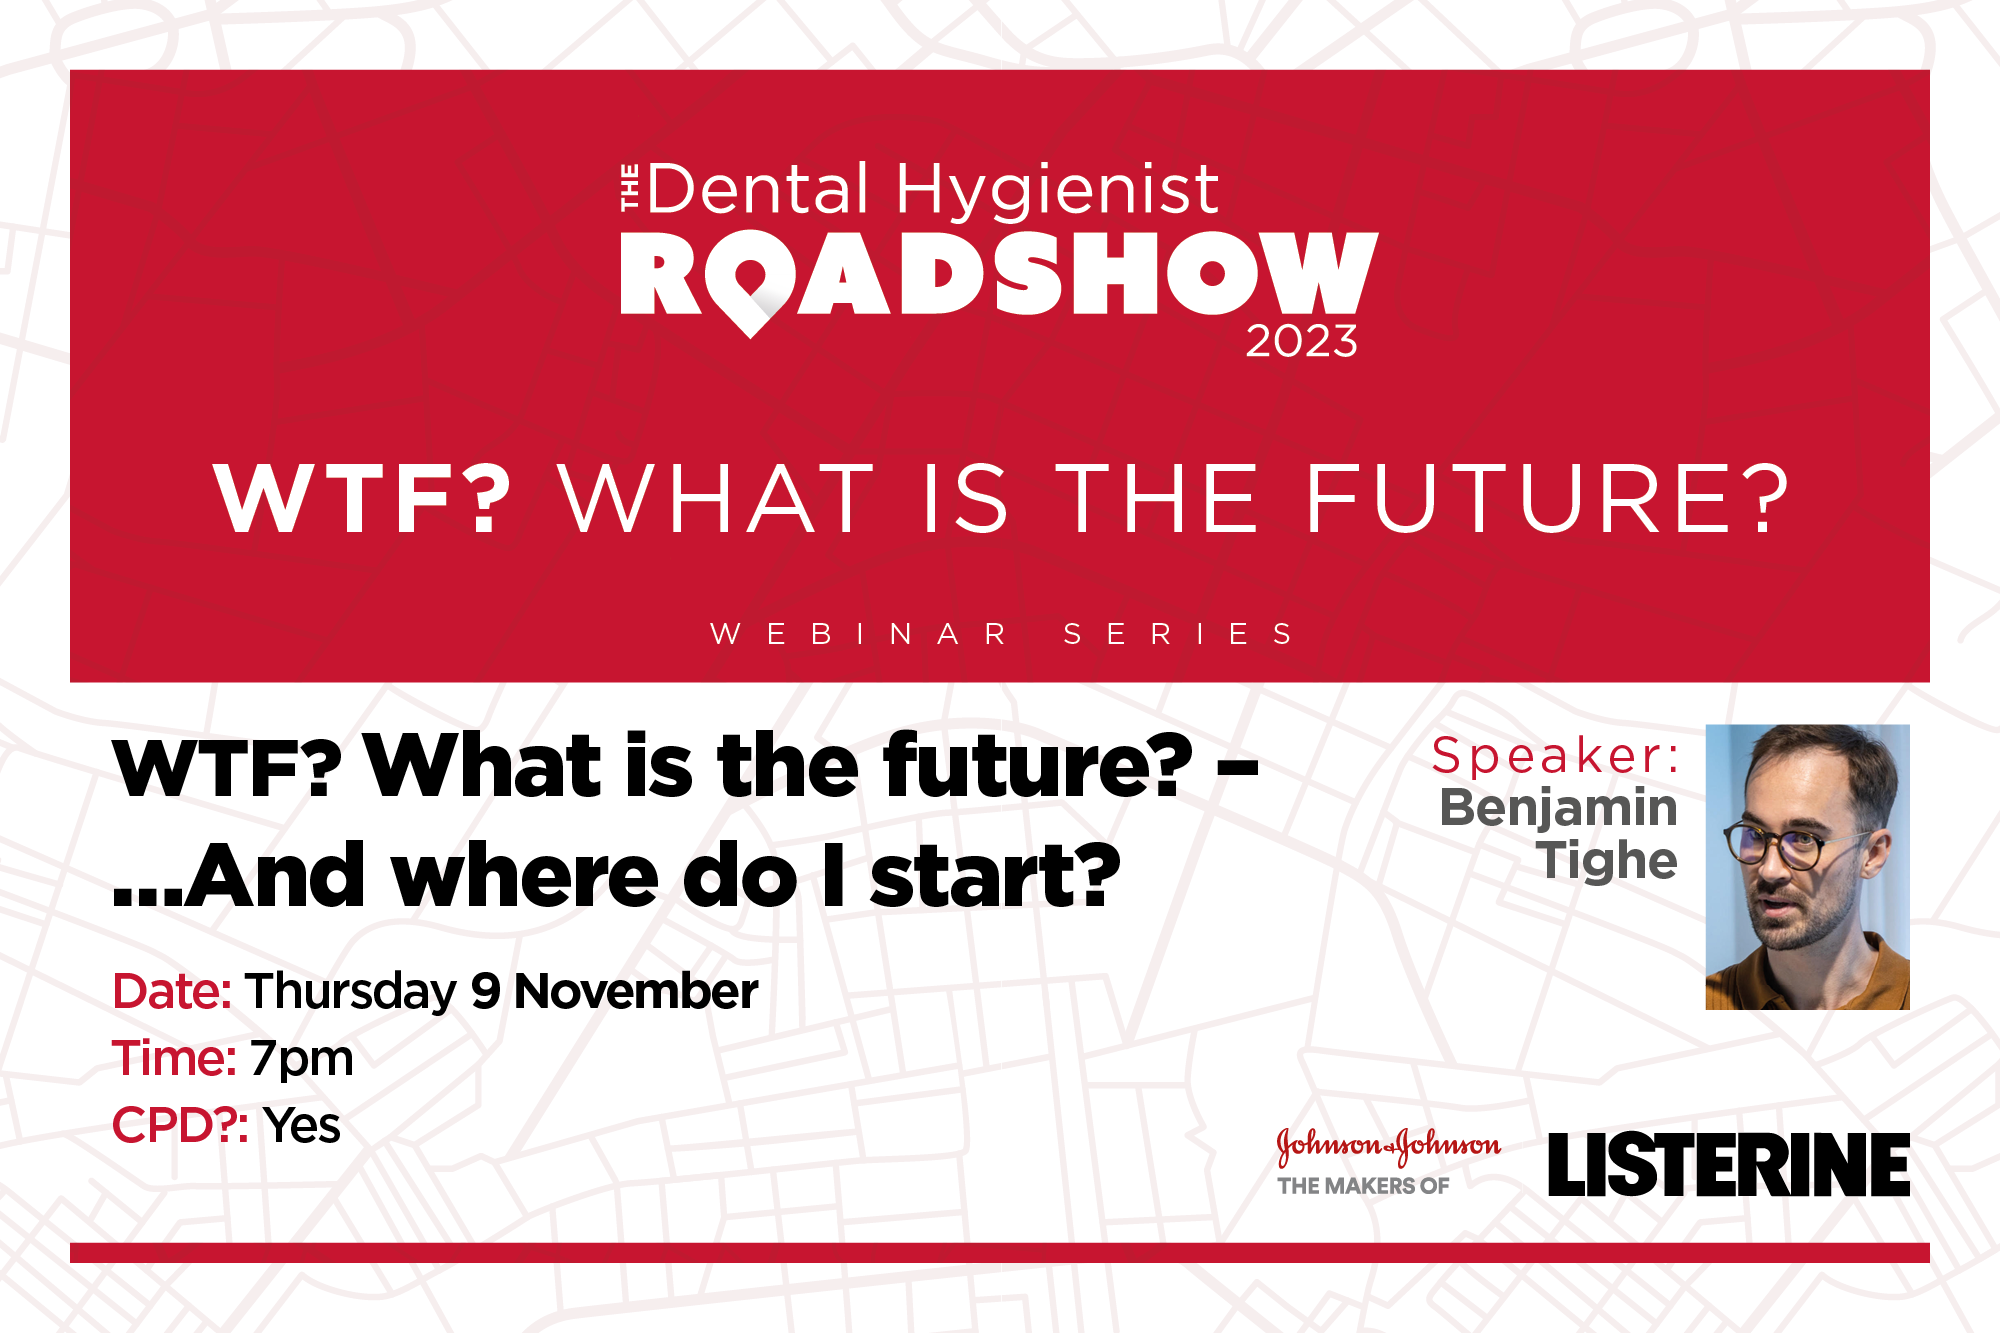 Join Benjamin Tighe on Thursday 9 November at 7pm as he discusses: what is the future and where do I start?